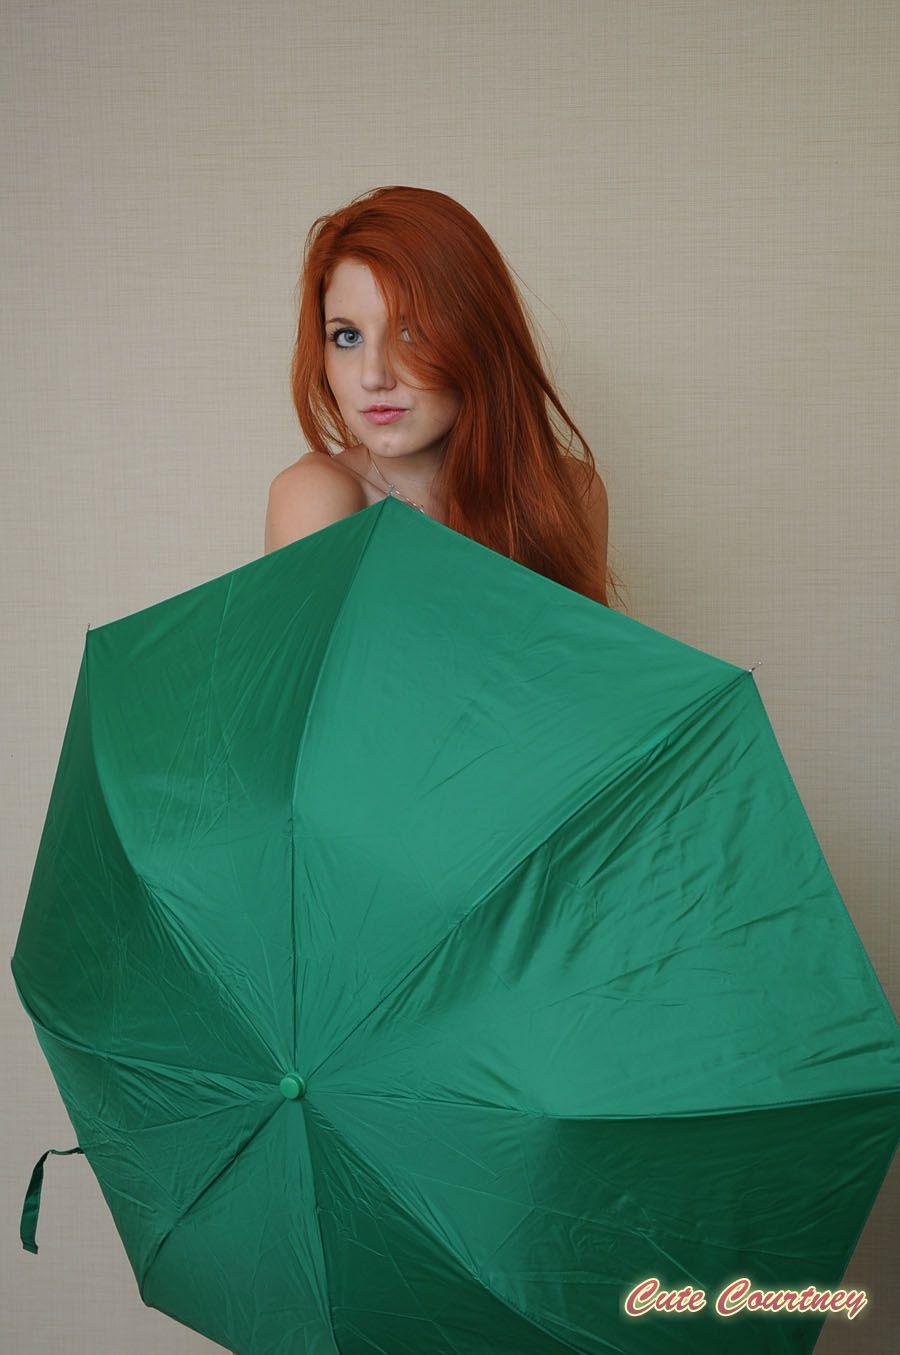 Pictures of Cute Courtney getting creative with an umbrella #53899198